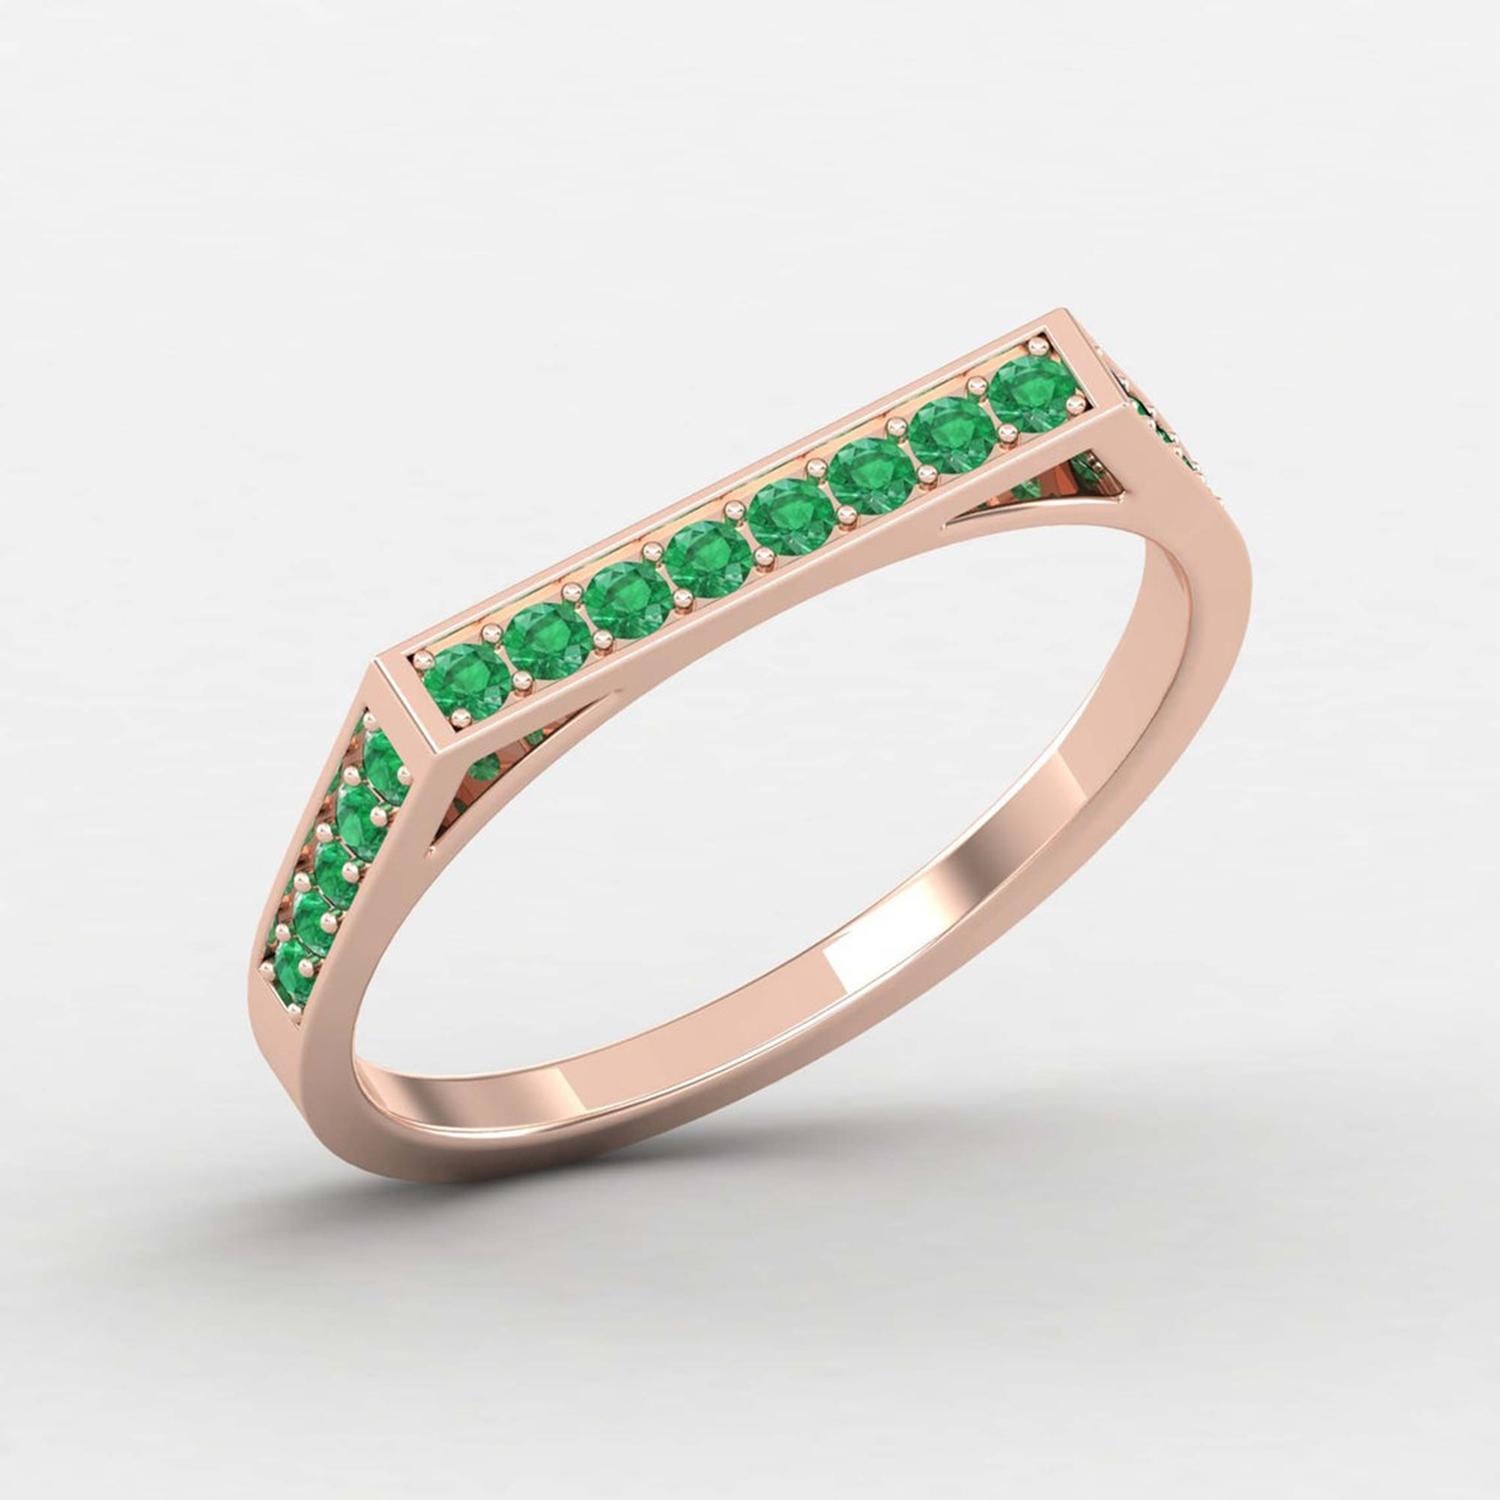 Round Cut 14 Karat Gold Round Green Emerald Ring / Gold Engagement Ring / Ring for Her For Sale